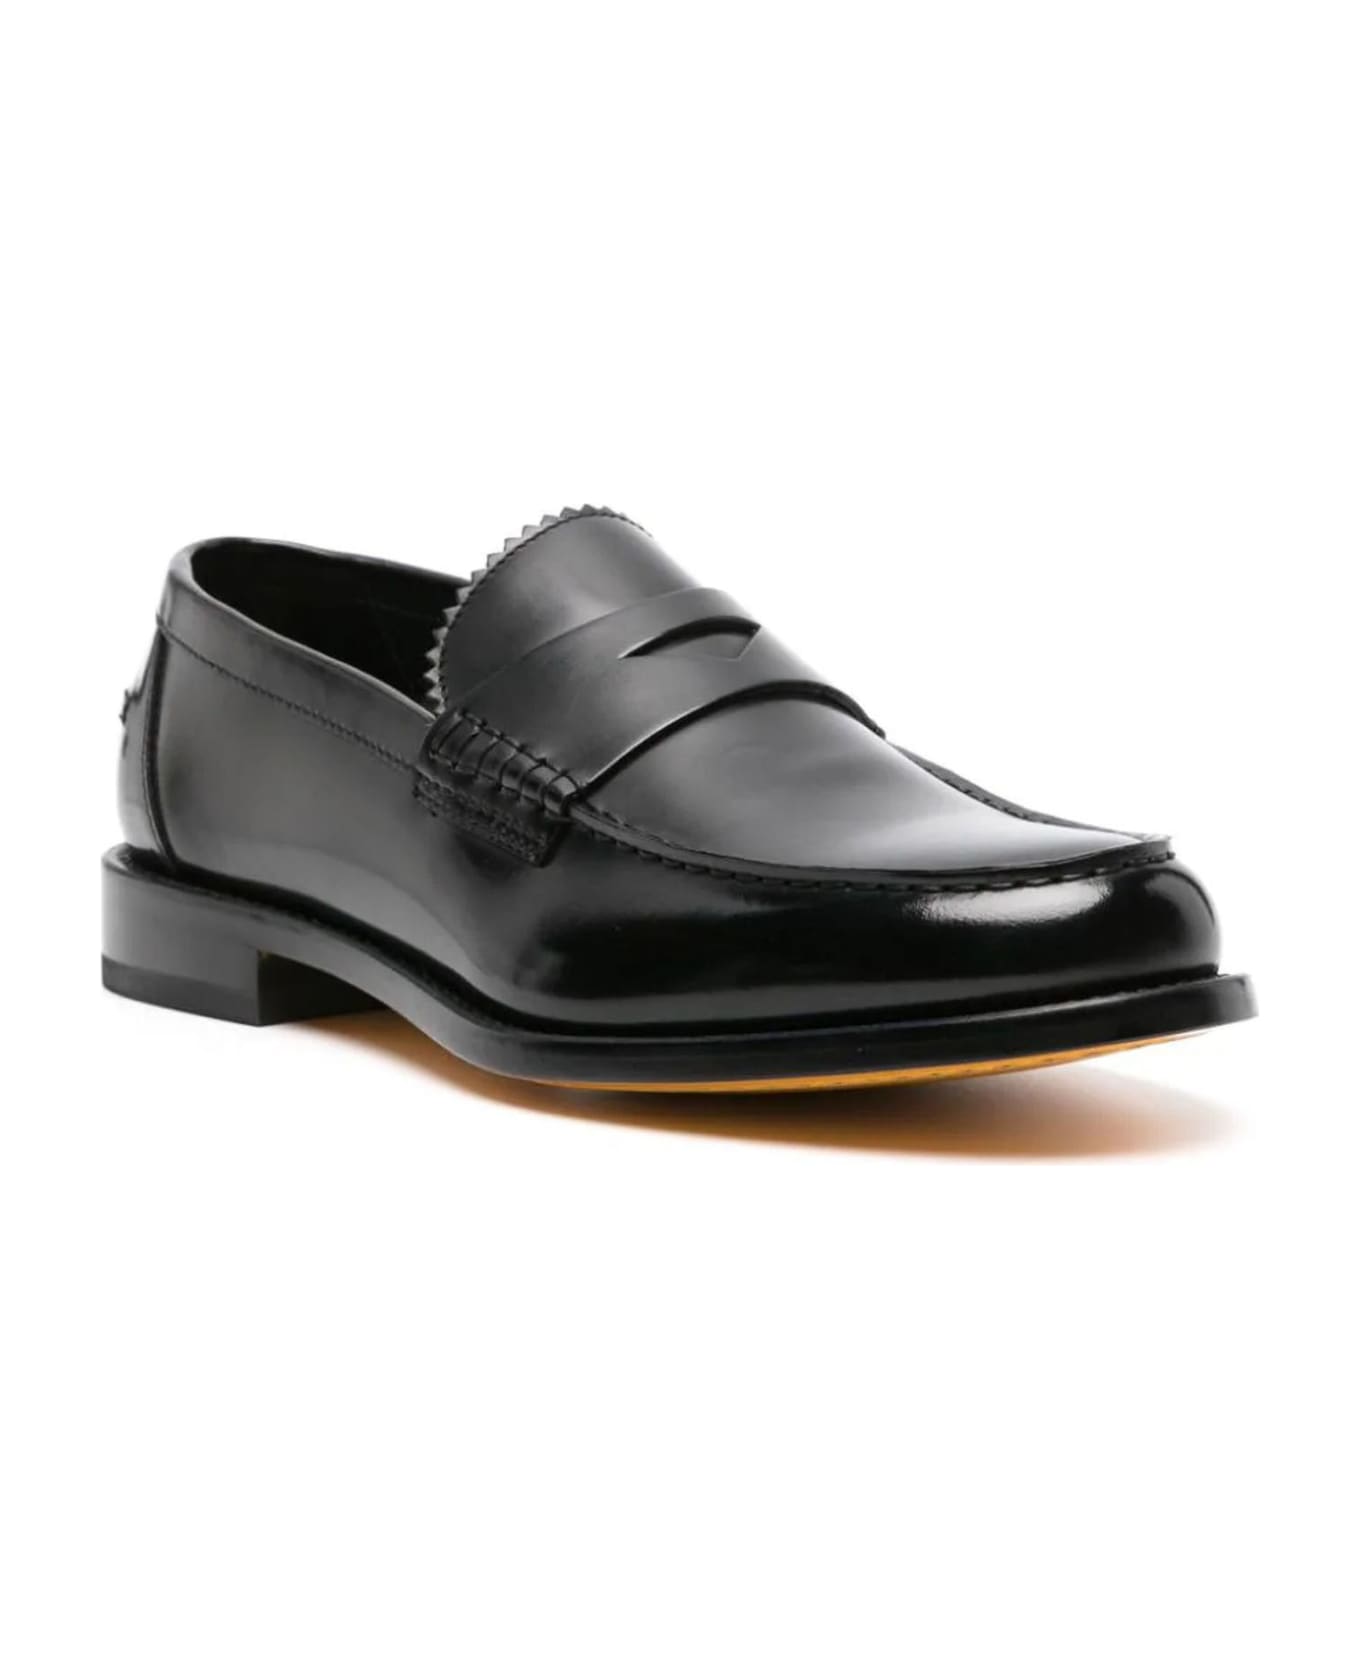 Doucal's Loafer In Black Leather - Black ローファー＆デッキシューズ